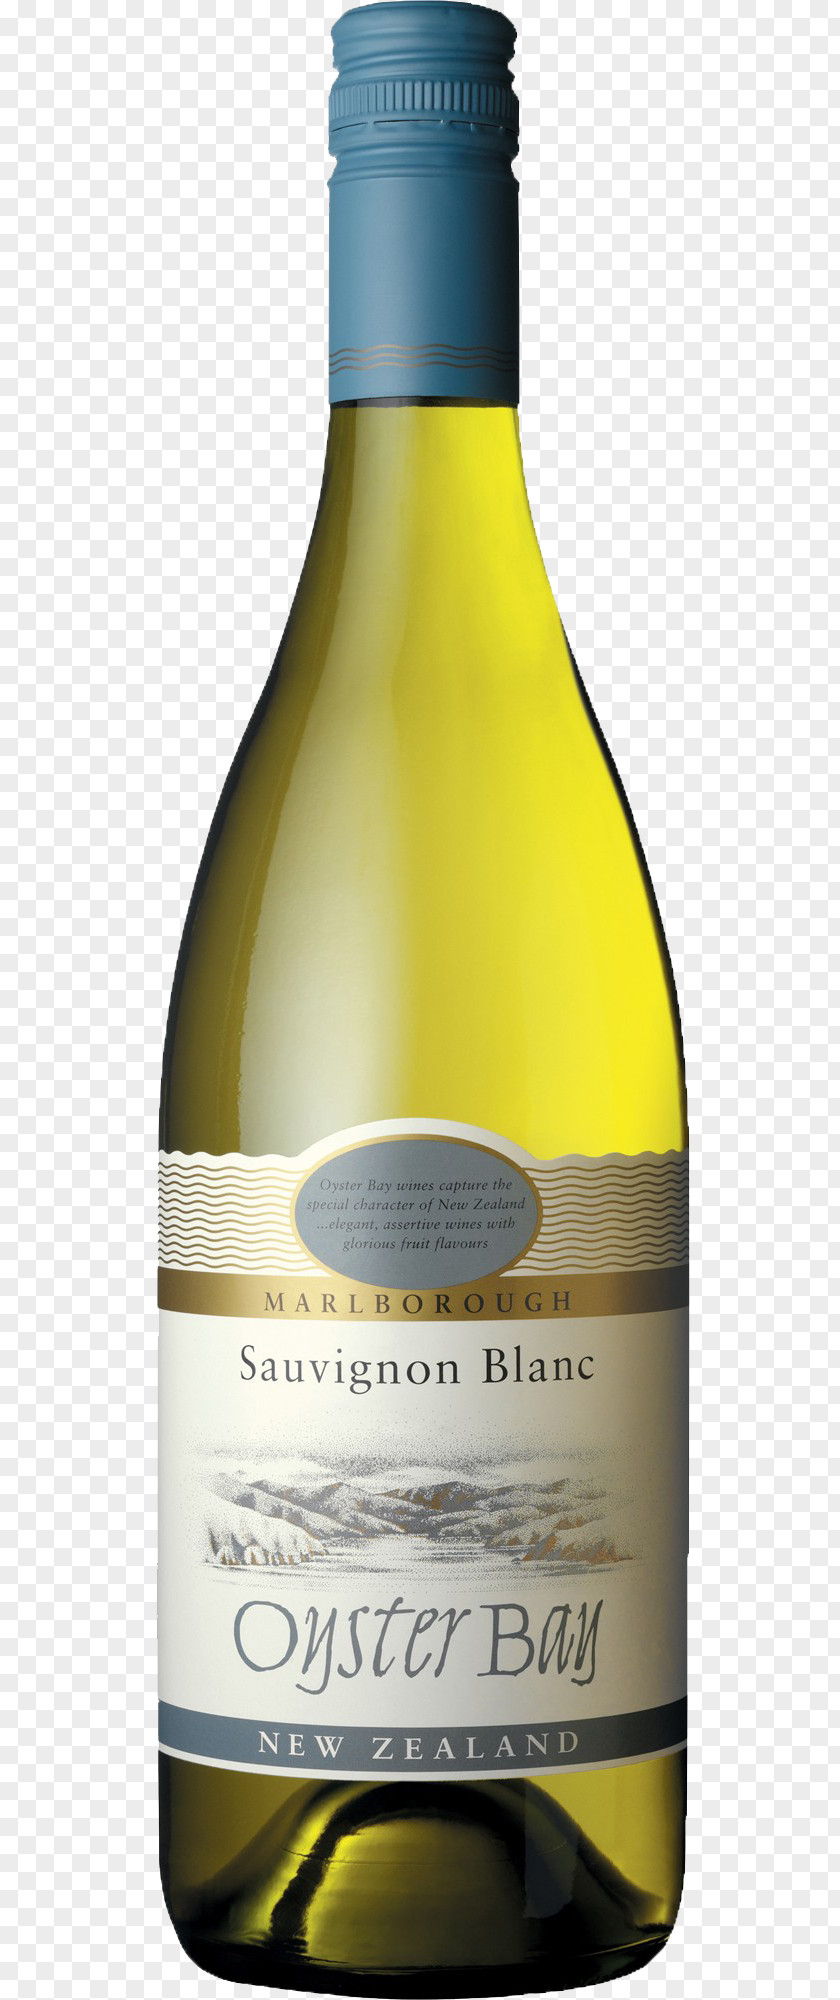 Green Wine Bottle Sauvignon Blanc White Oyster Bay Pinot Gris PNG